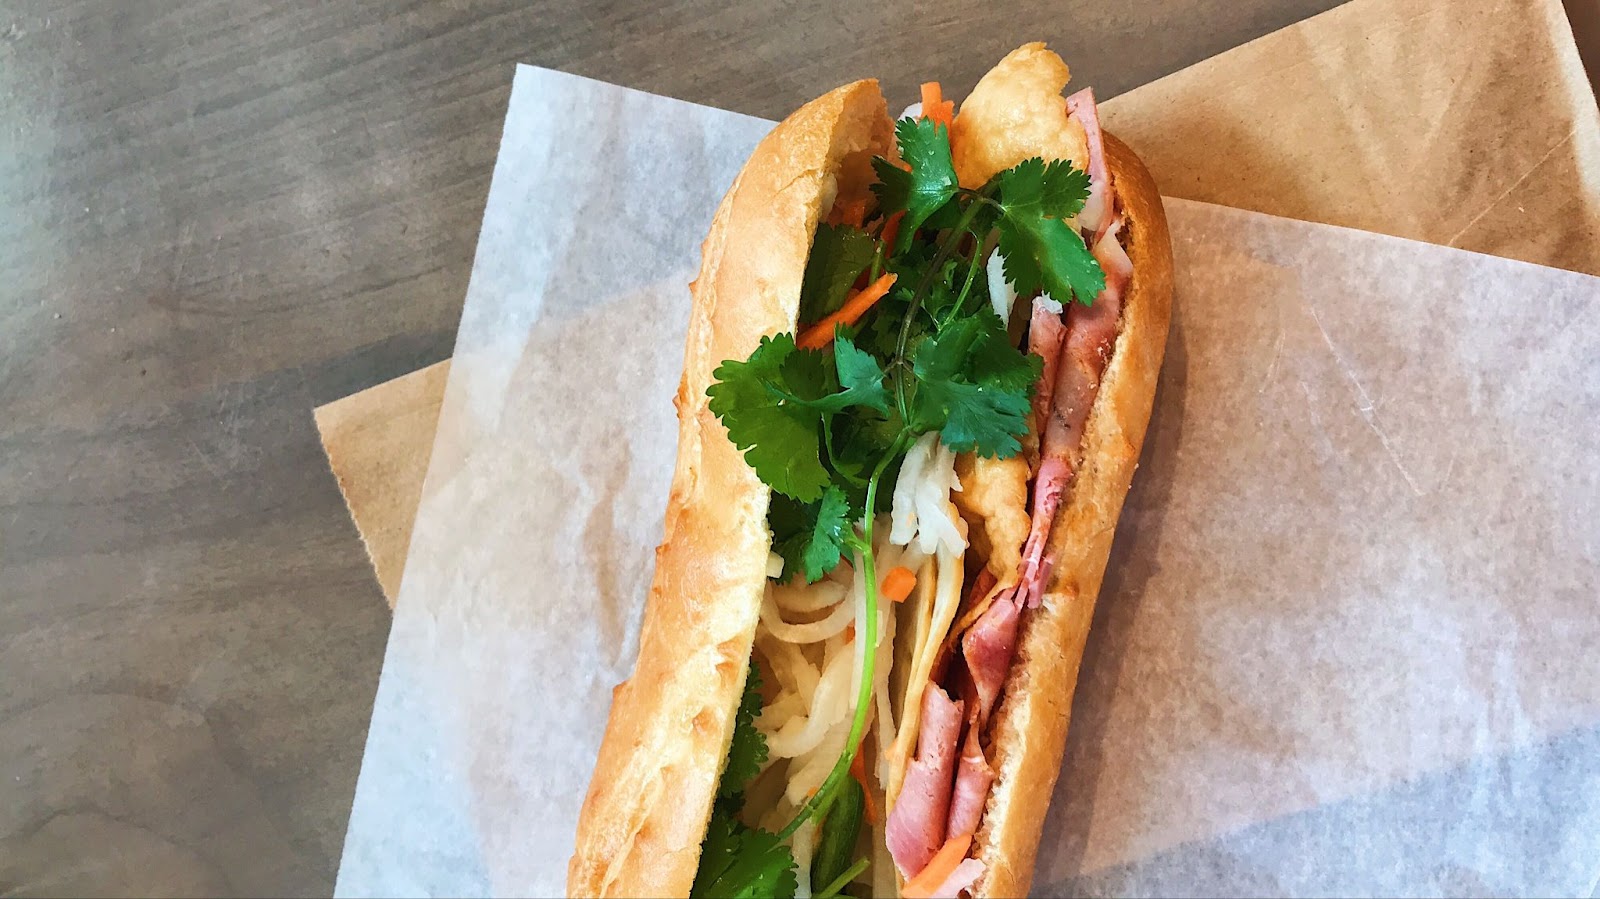 Banh Mi, a Vietnamese sandwich, with cilantro, carrot sticks, meat and veggies on a baguette